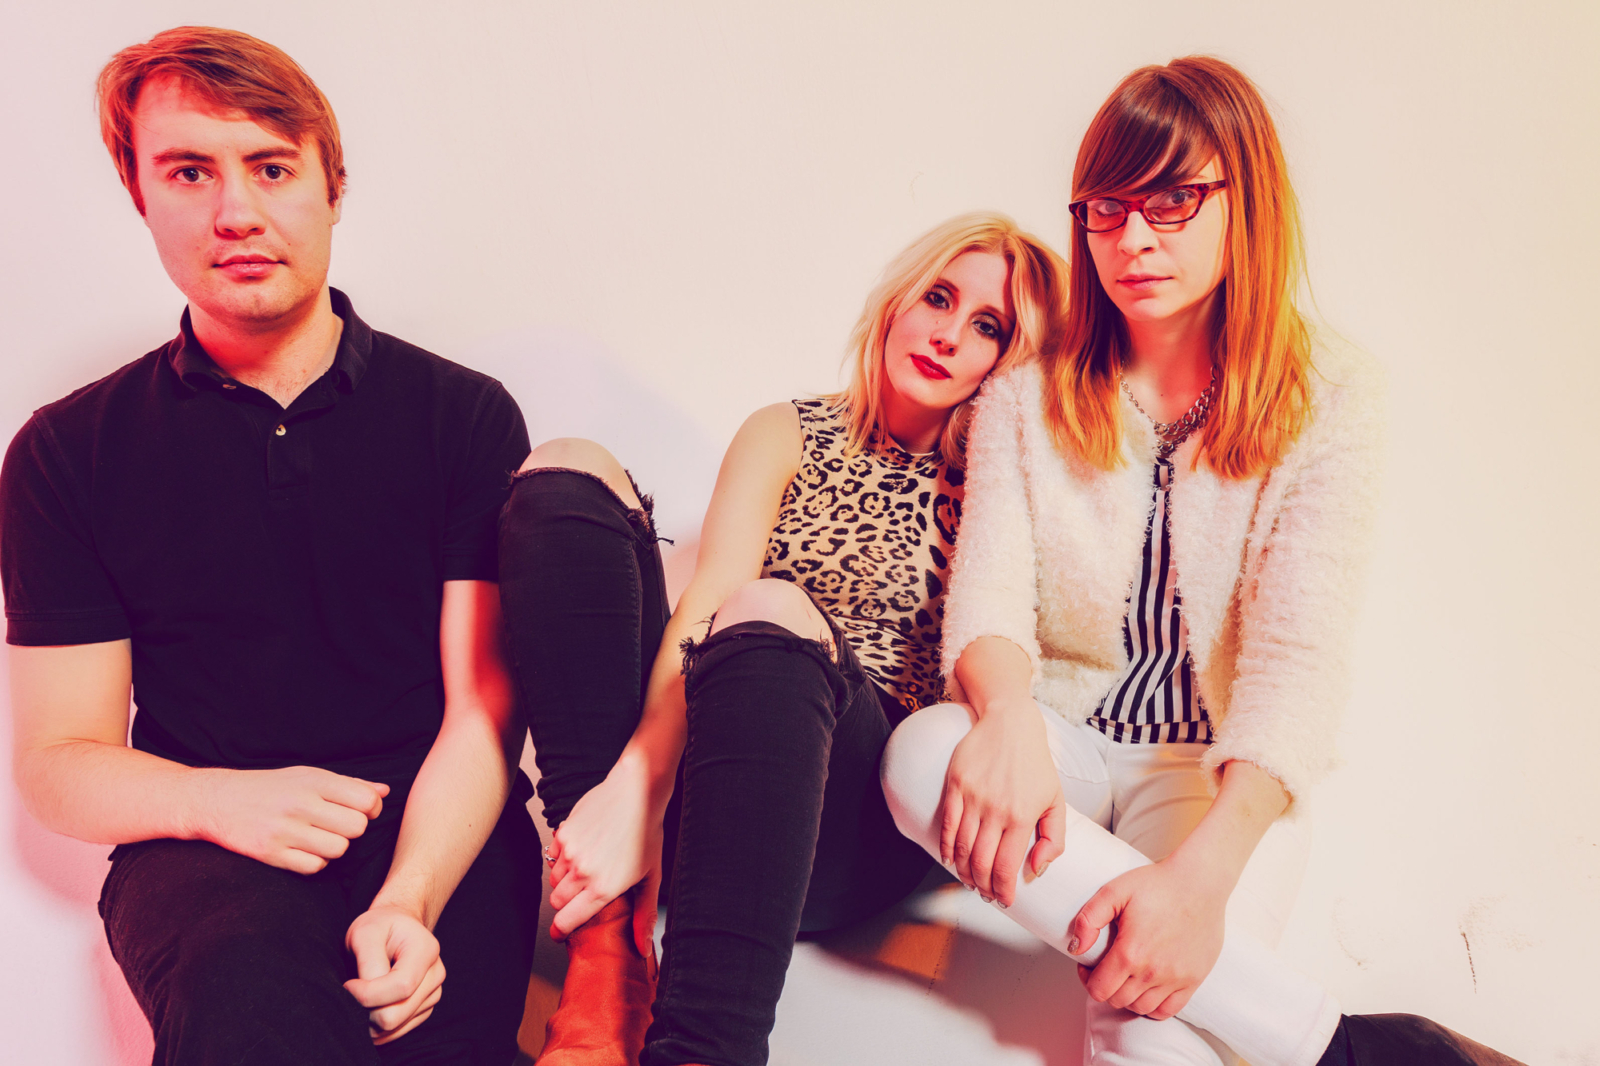 White Lung take on your questions in DIY's Popstar Postbag